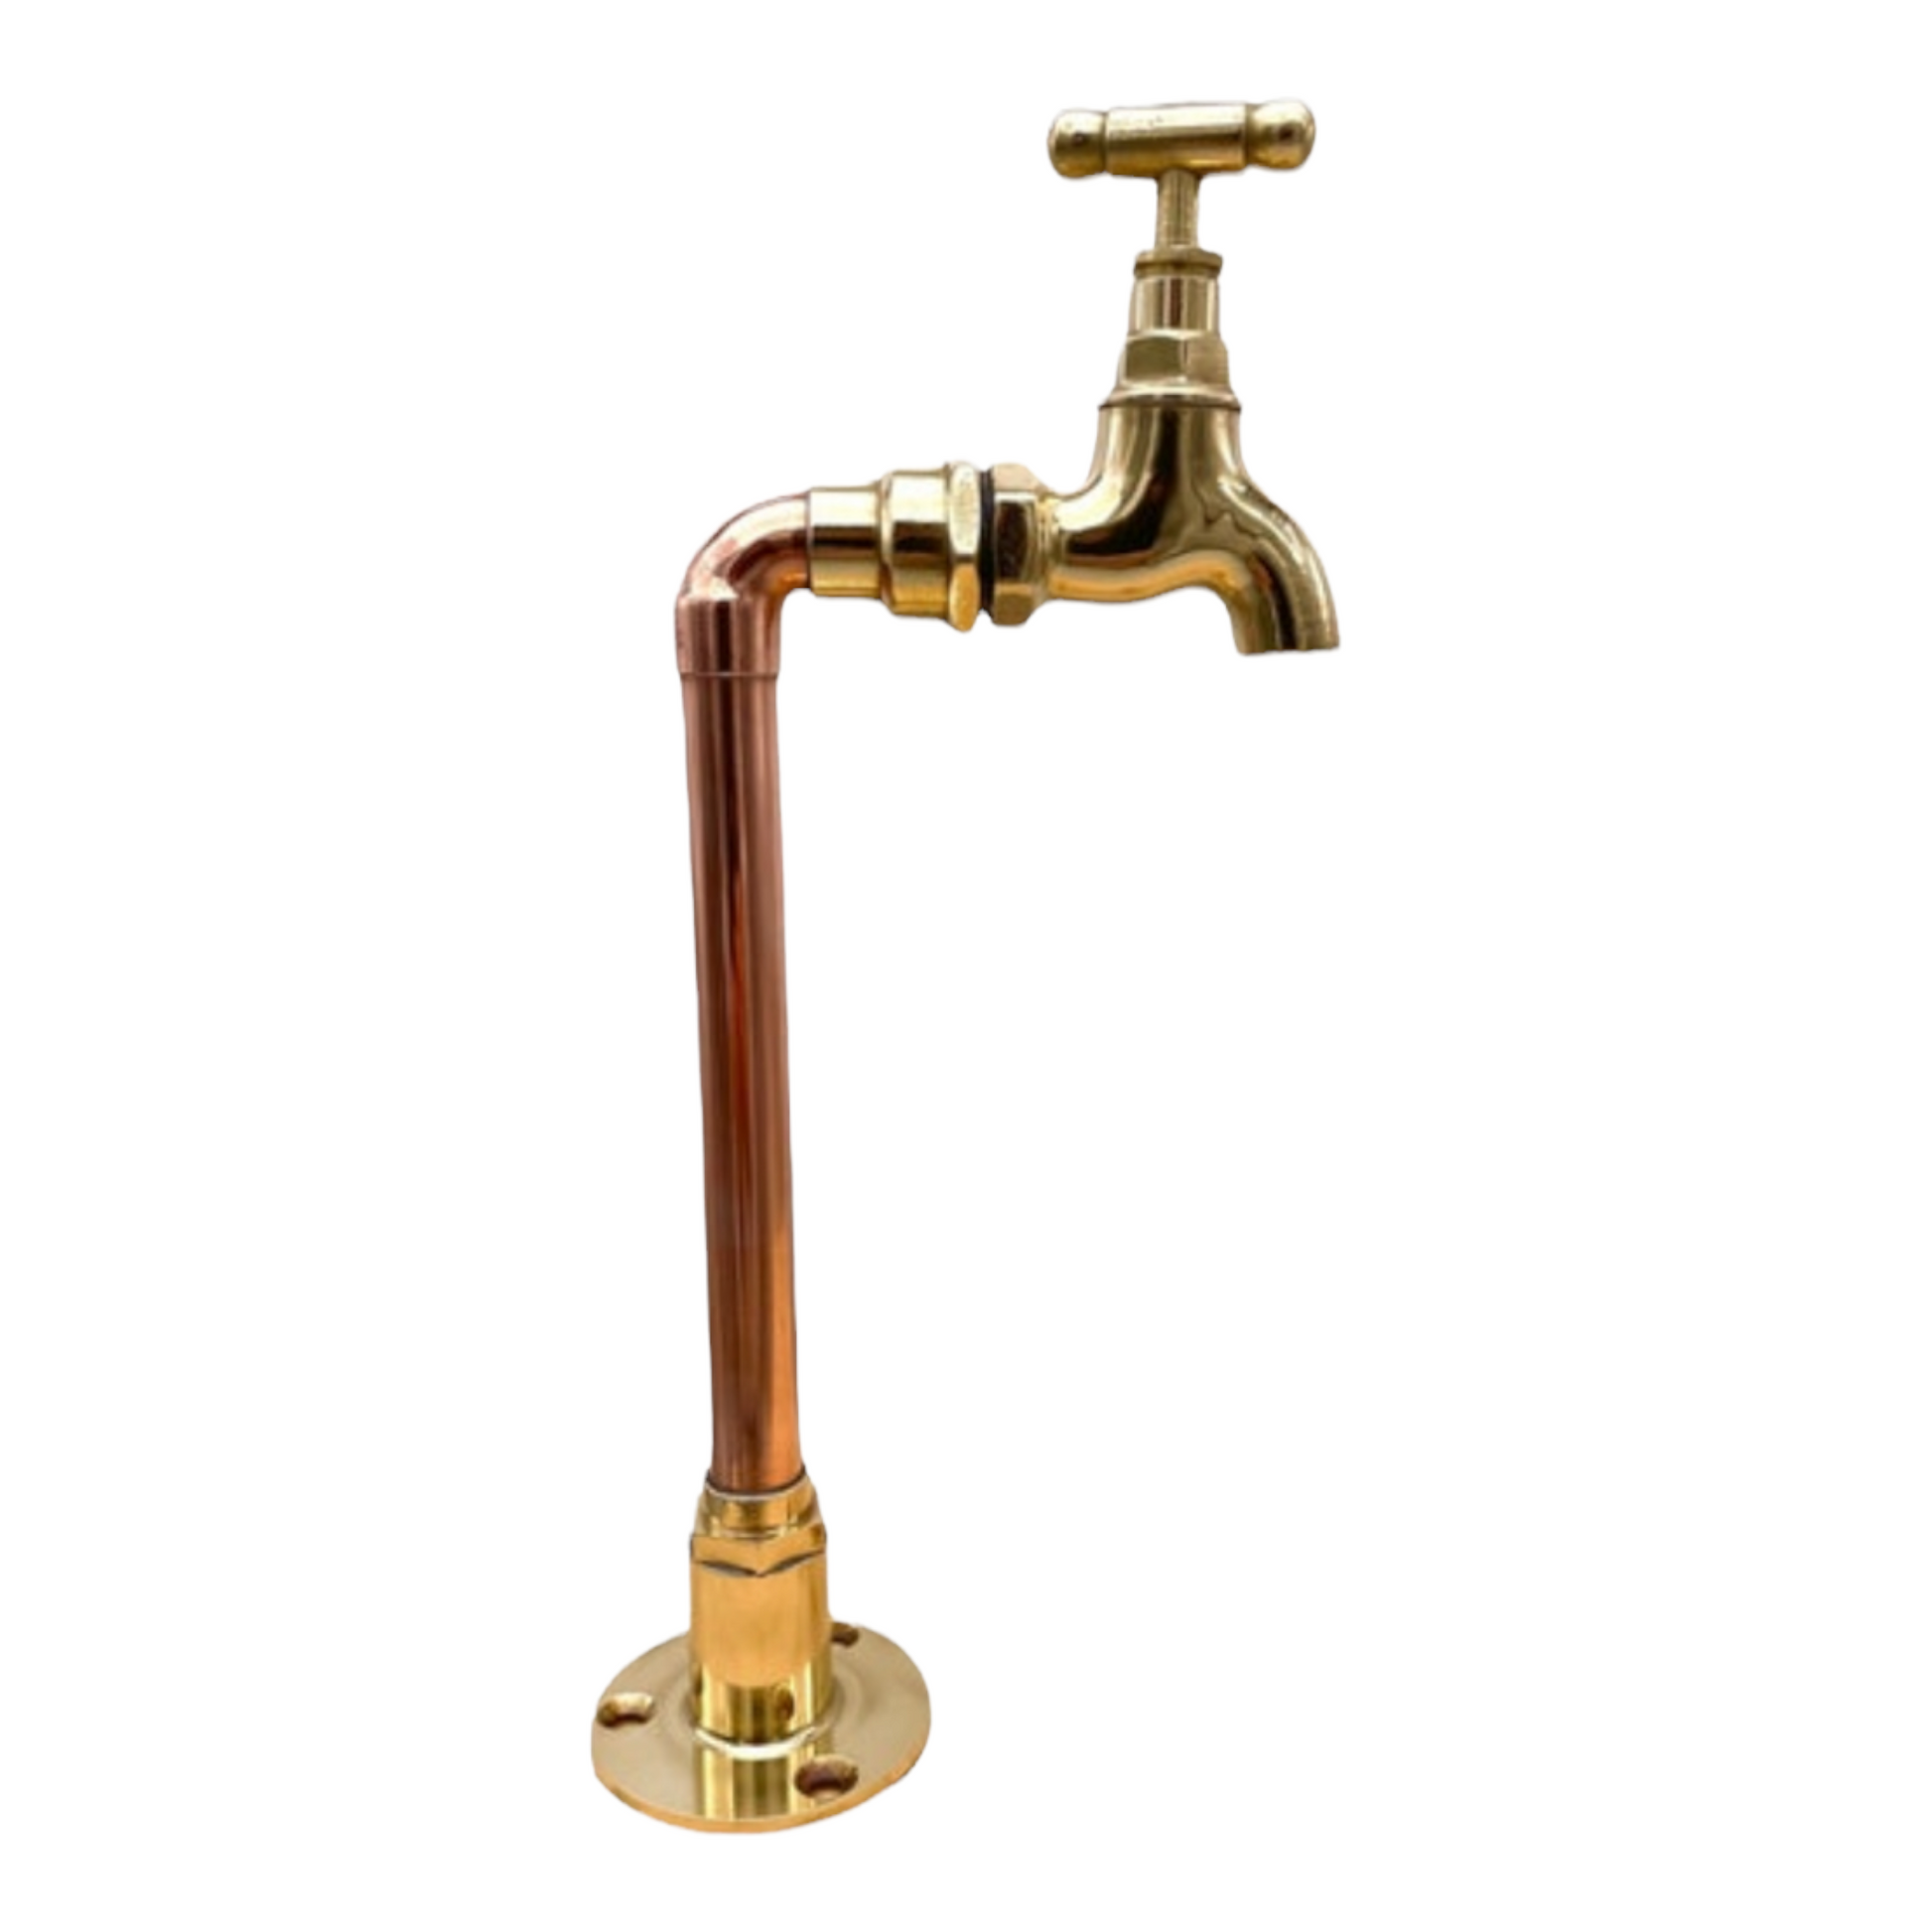 pair of copper and brass handmade taps side view sold by All Things French Store